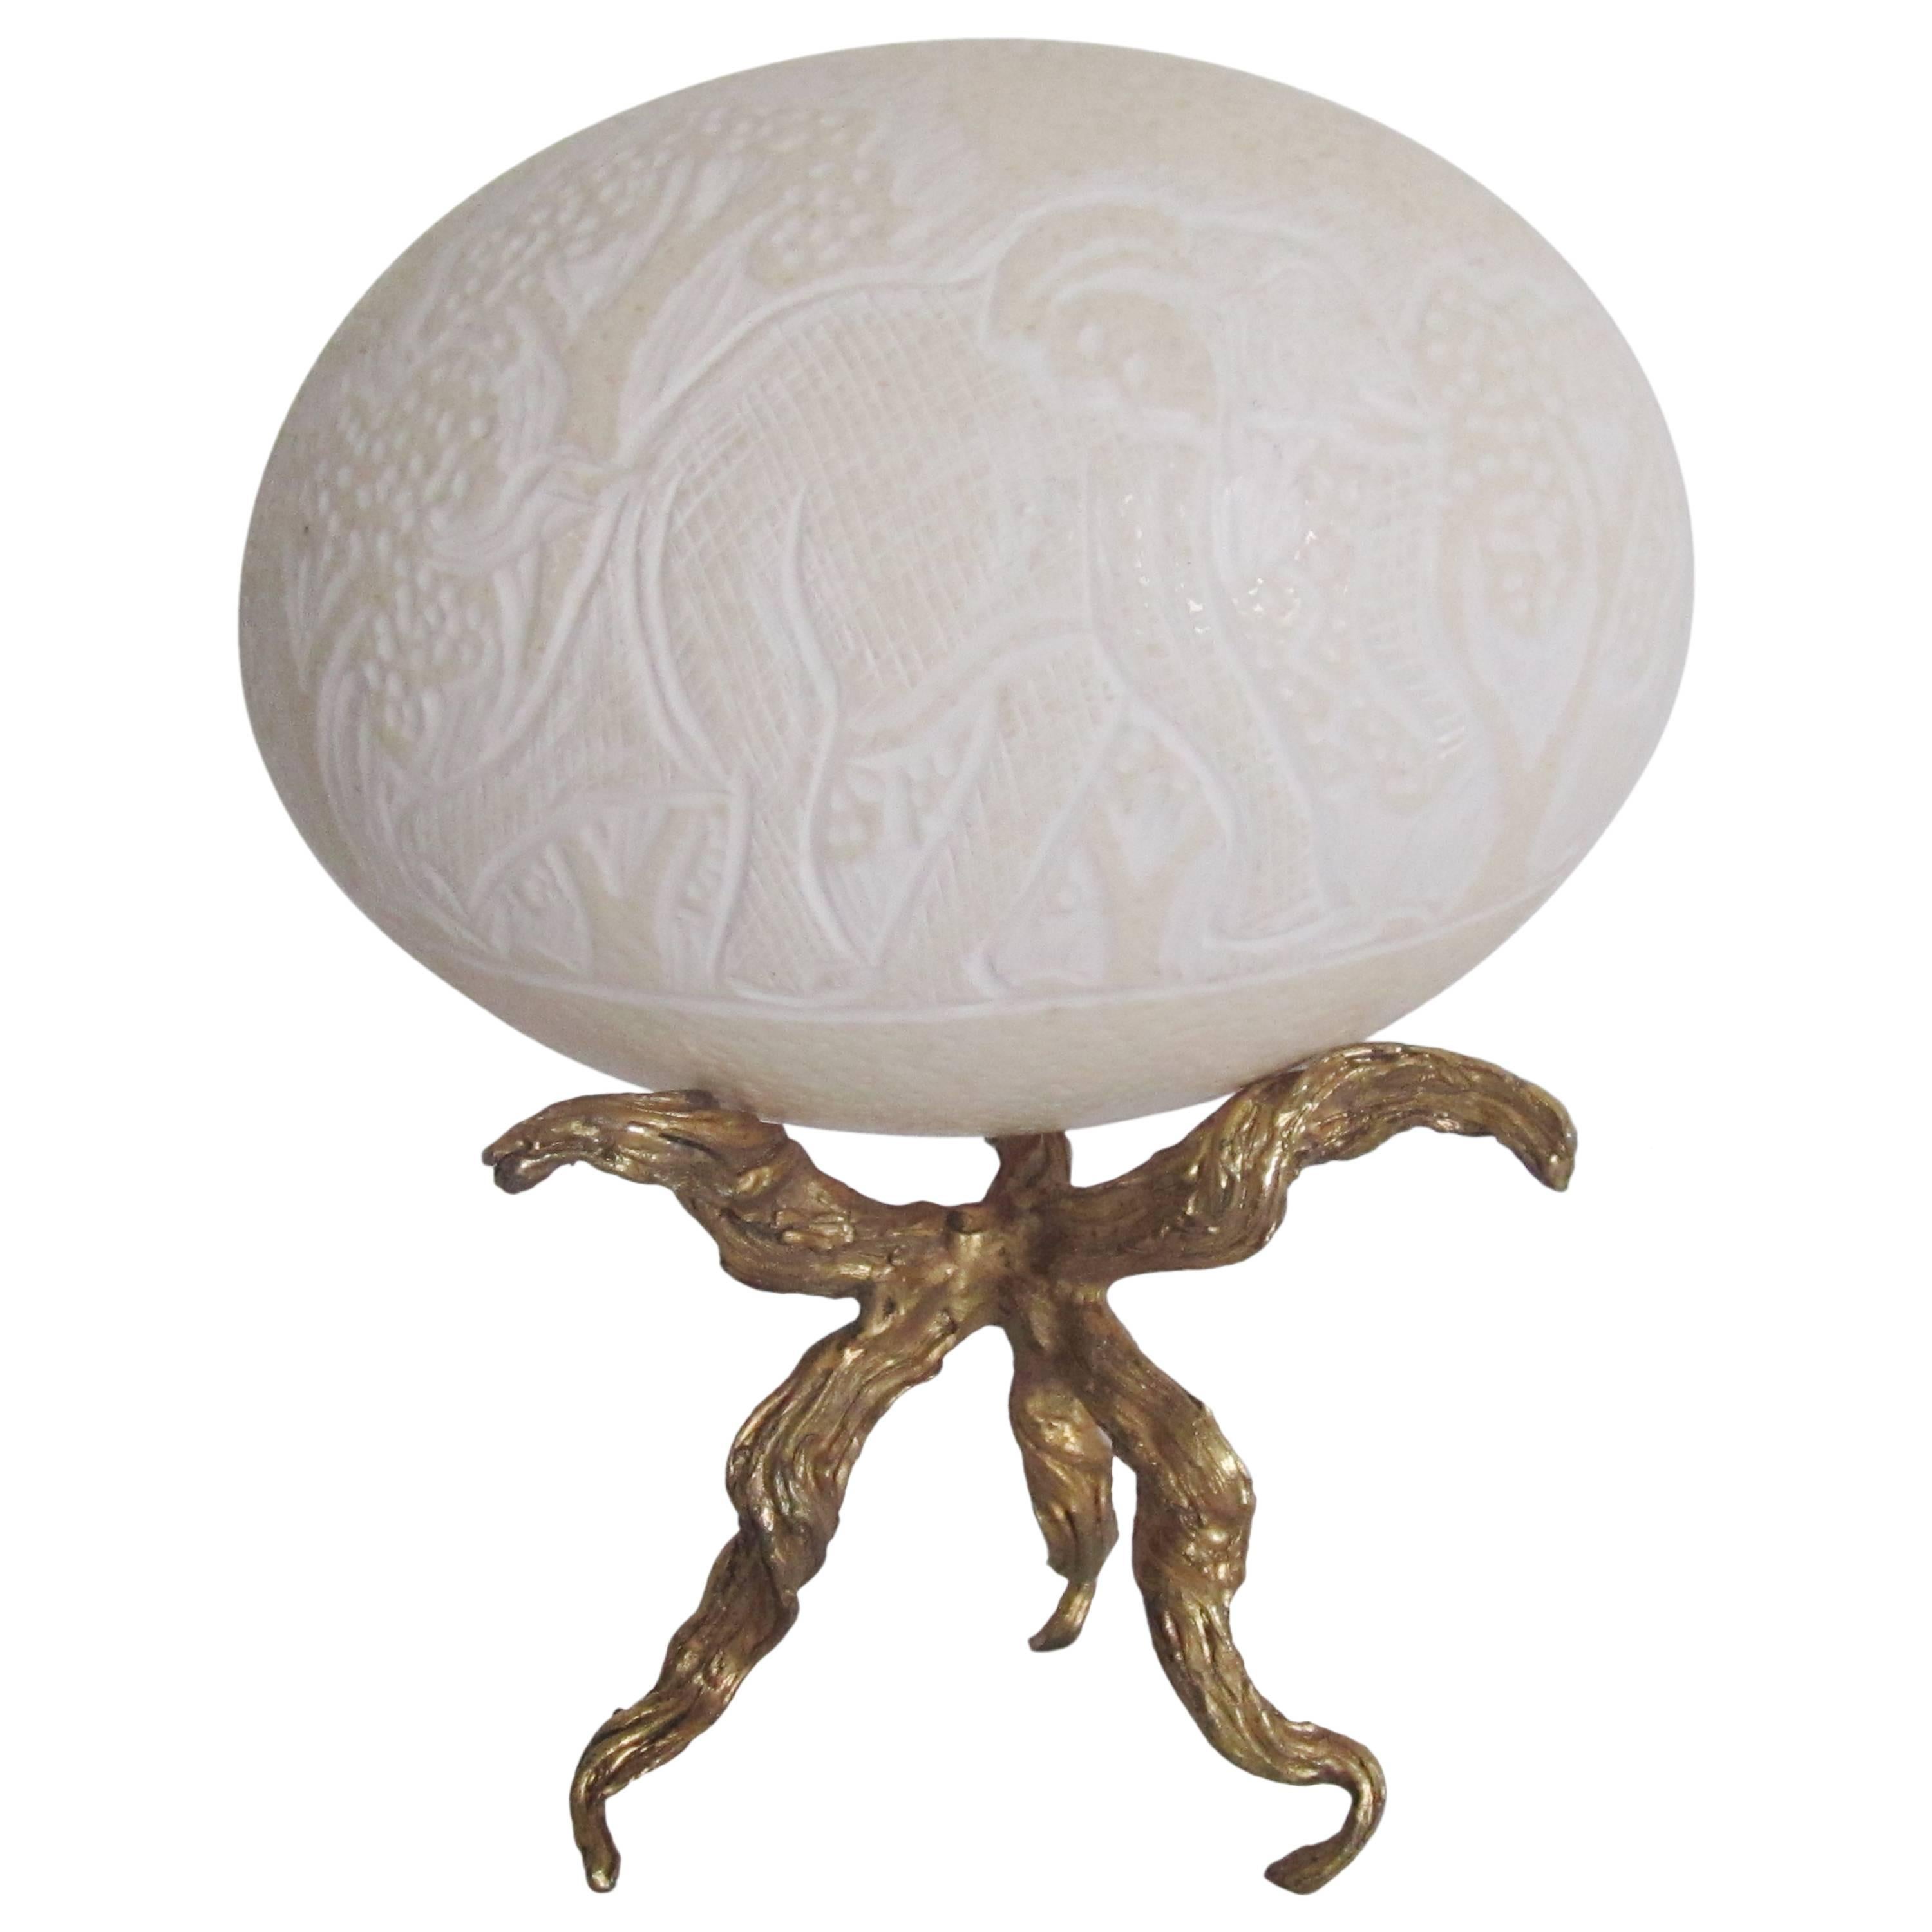 Elephant and Rhino Craved Ostrich Egg on Twisted Gold Base